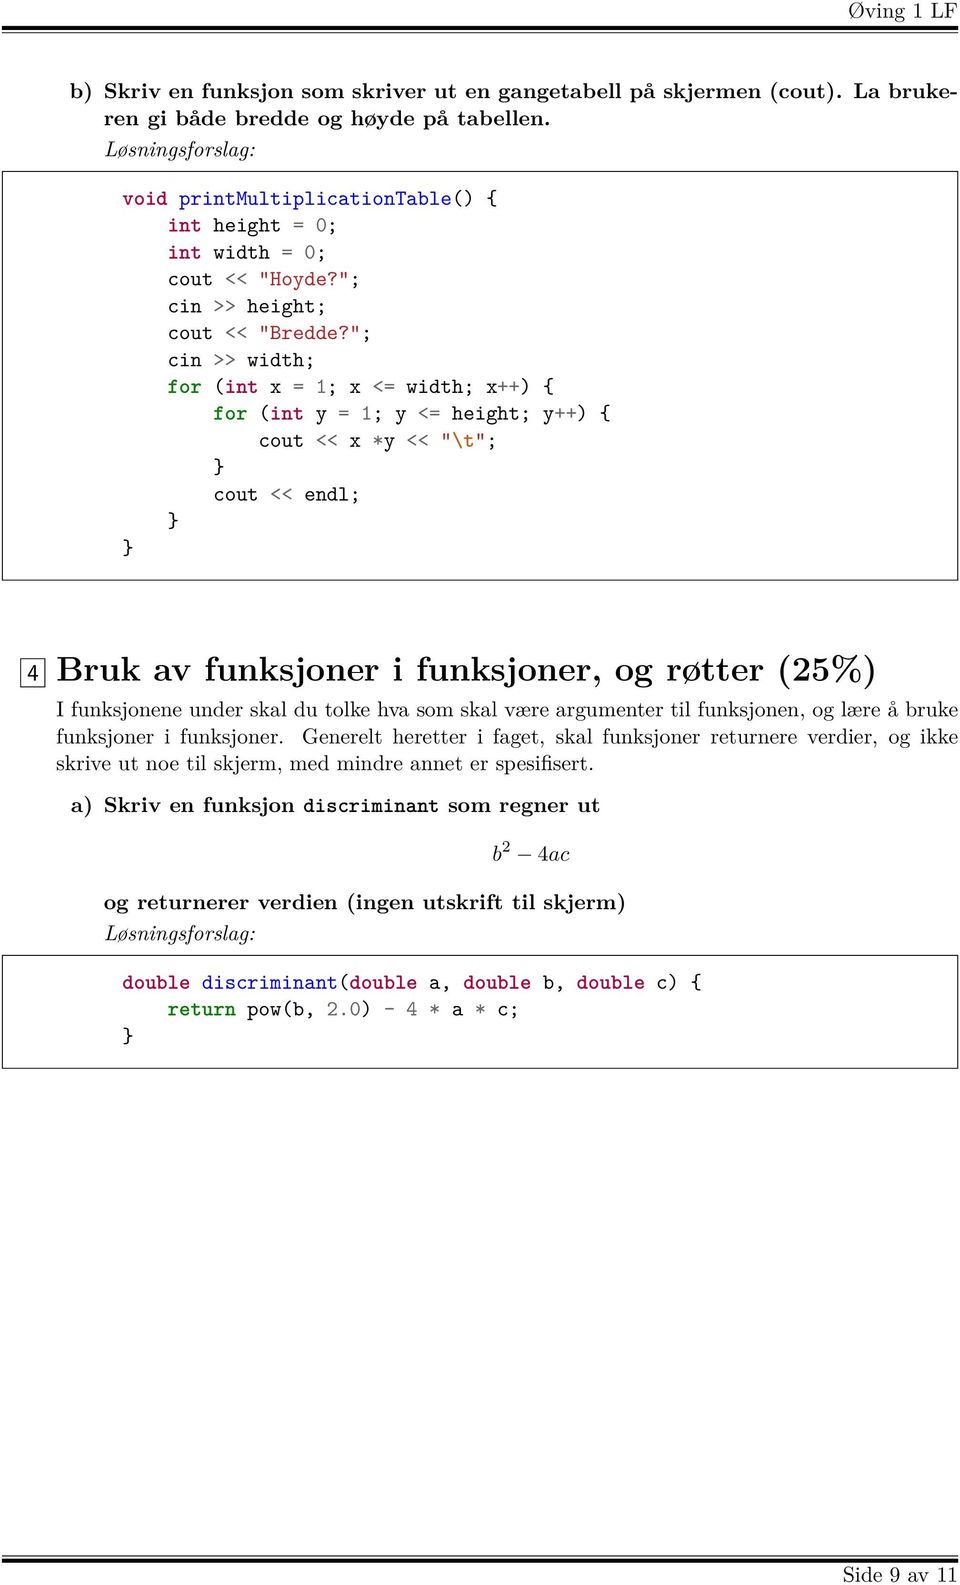 "; cin >> width; for (int x = 1; x <= width; x++) { for (int y = 1; y <= height; y++) { cout << x *y << "\t"; cout << endl; 4 Bruk av funksjoner i funksjoner, og røtter (25%) I funksjonene under skal